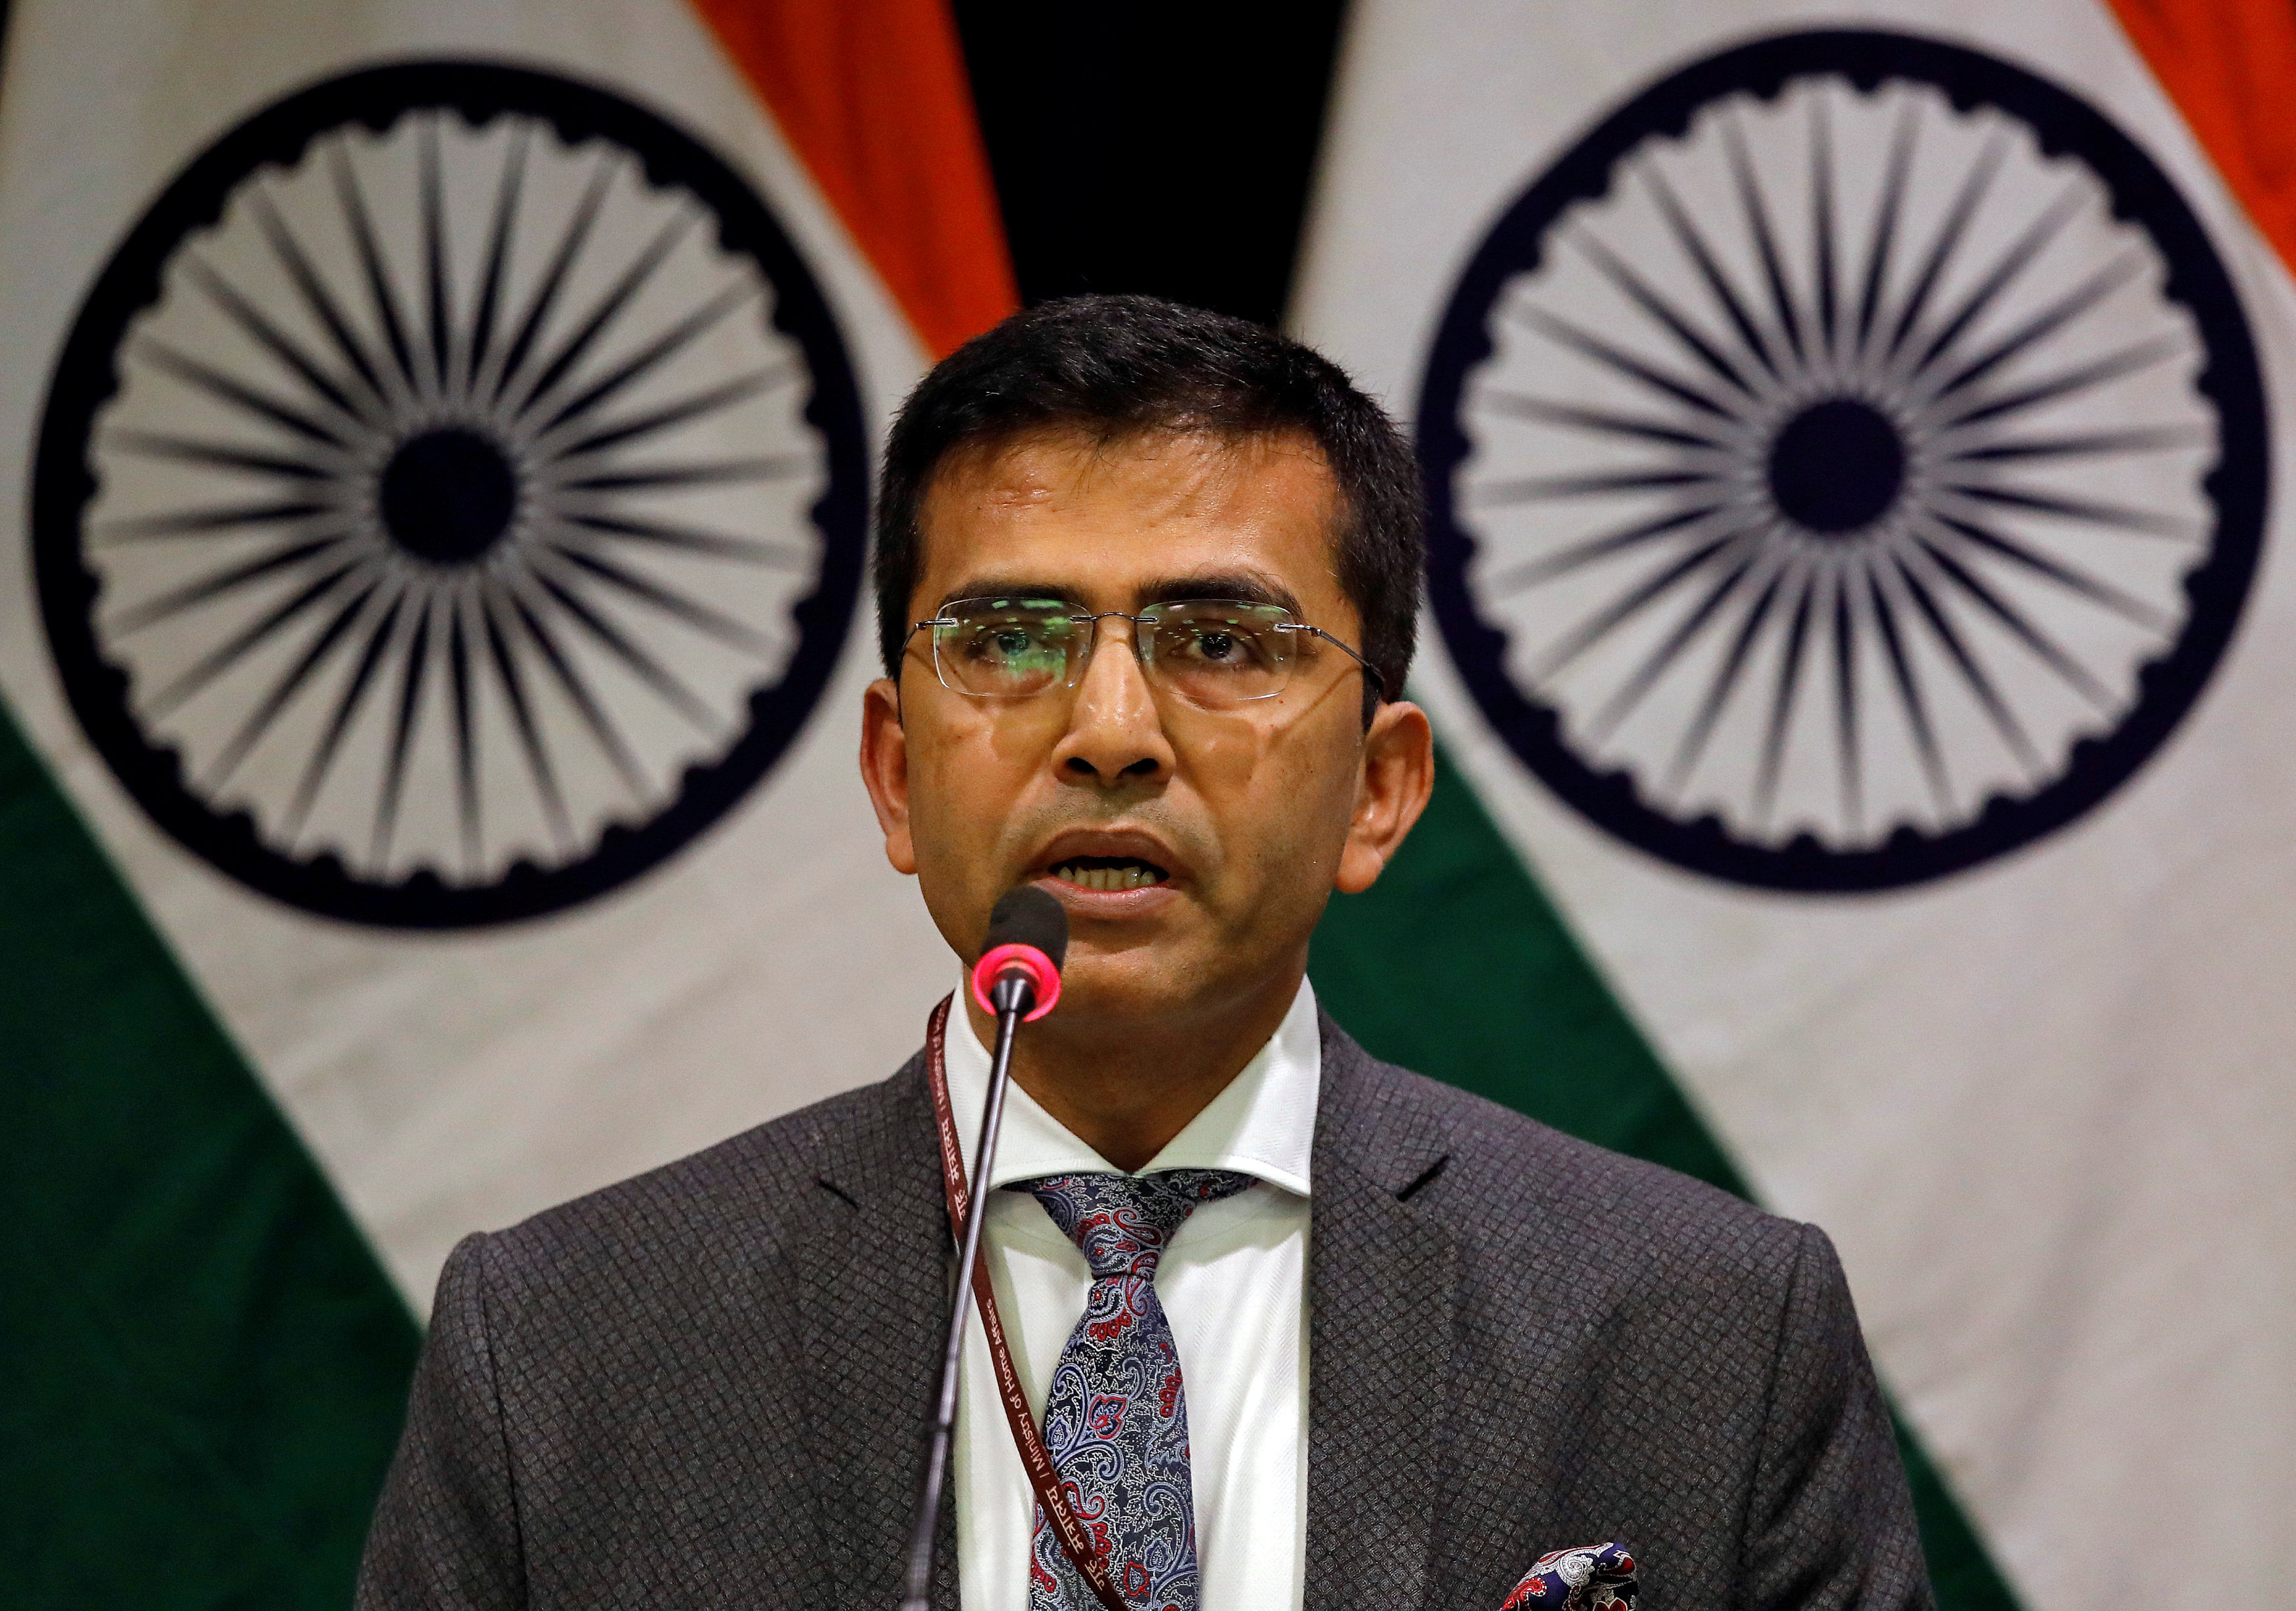 "India rejects all references to Jammu and Kashmir, which is an integral and inalienable part of India," Kumar said in reference to Erdogan's comments on Jammu and Kashmir. (Credit: PTI Photo)